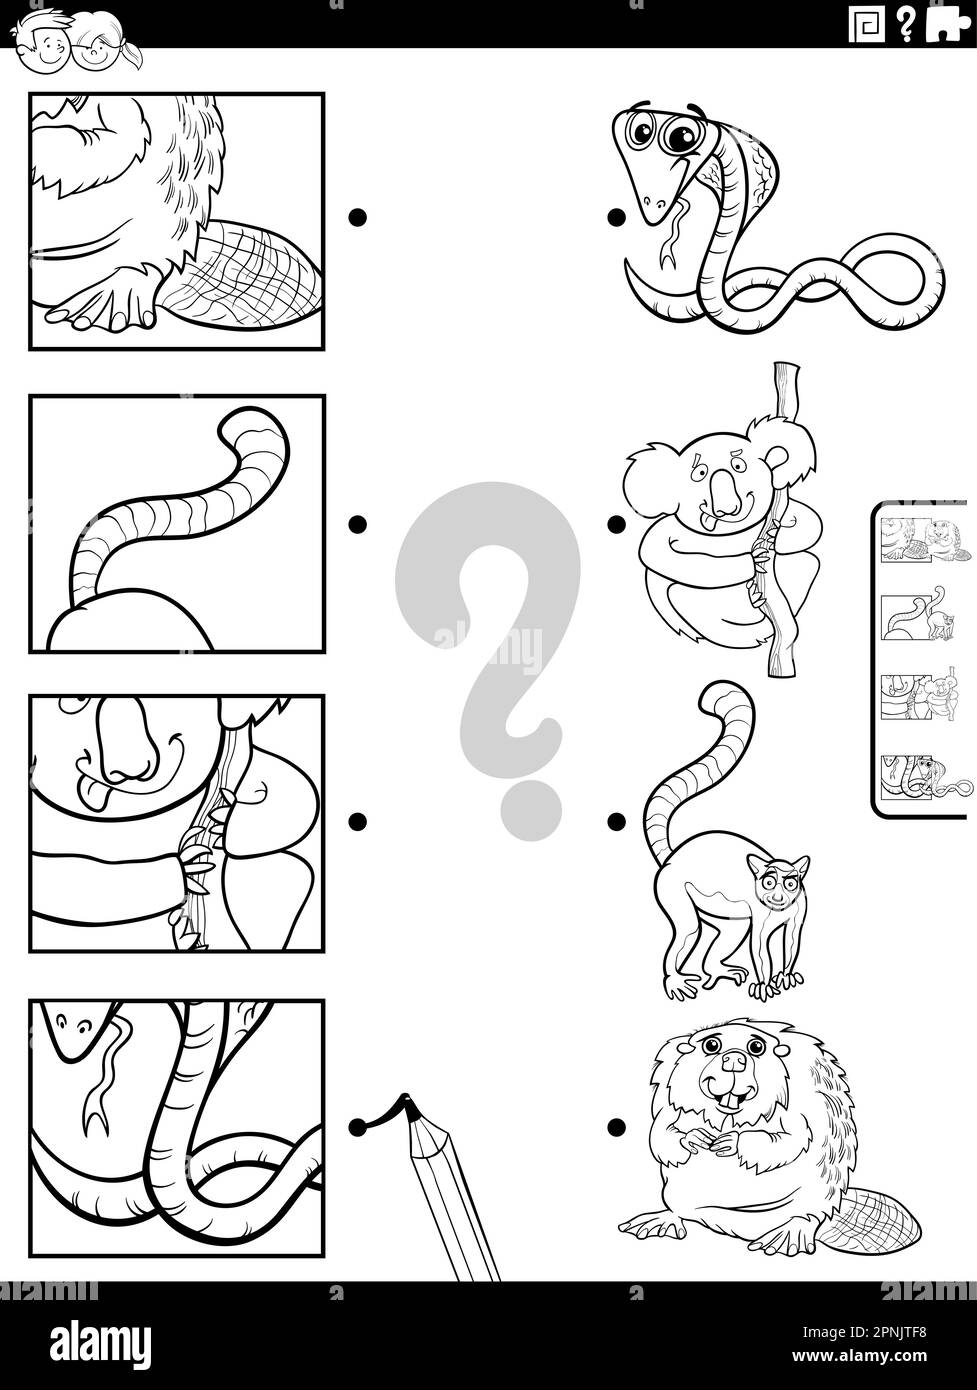 Black and white cartoon illustration of educational matching game with animal characters and pictures clippings coloring page Stock Vector